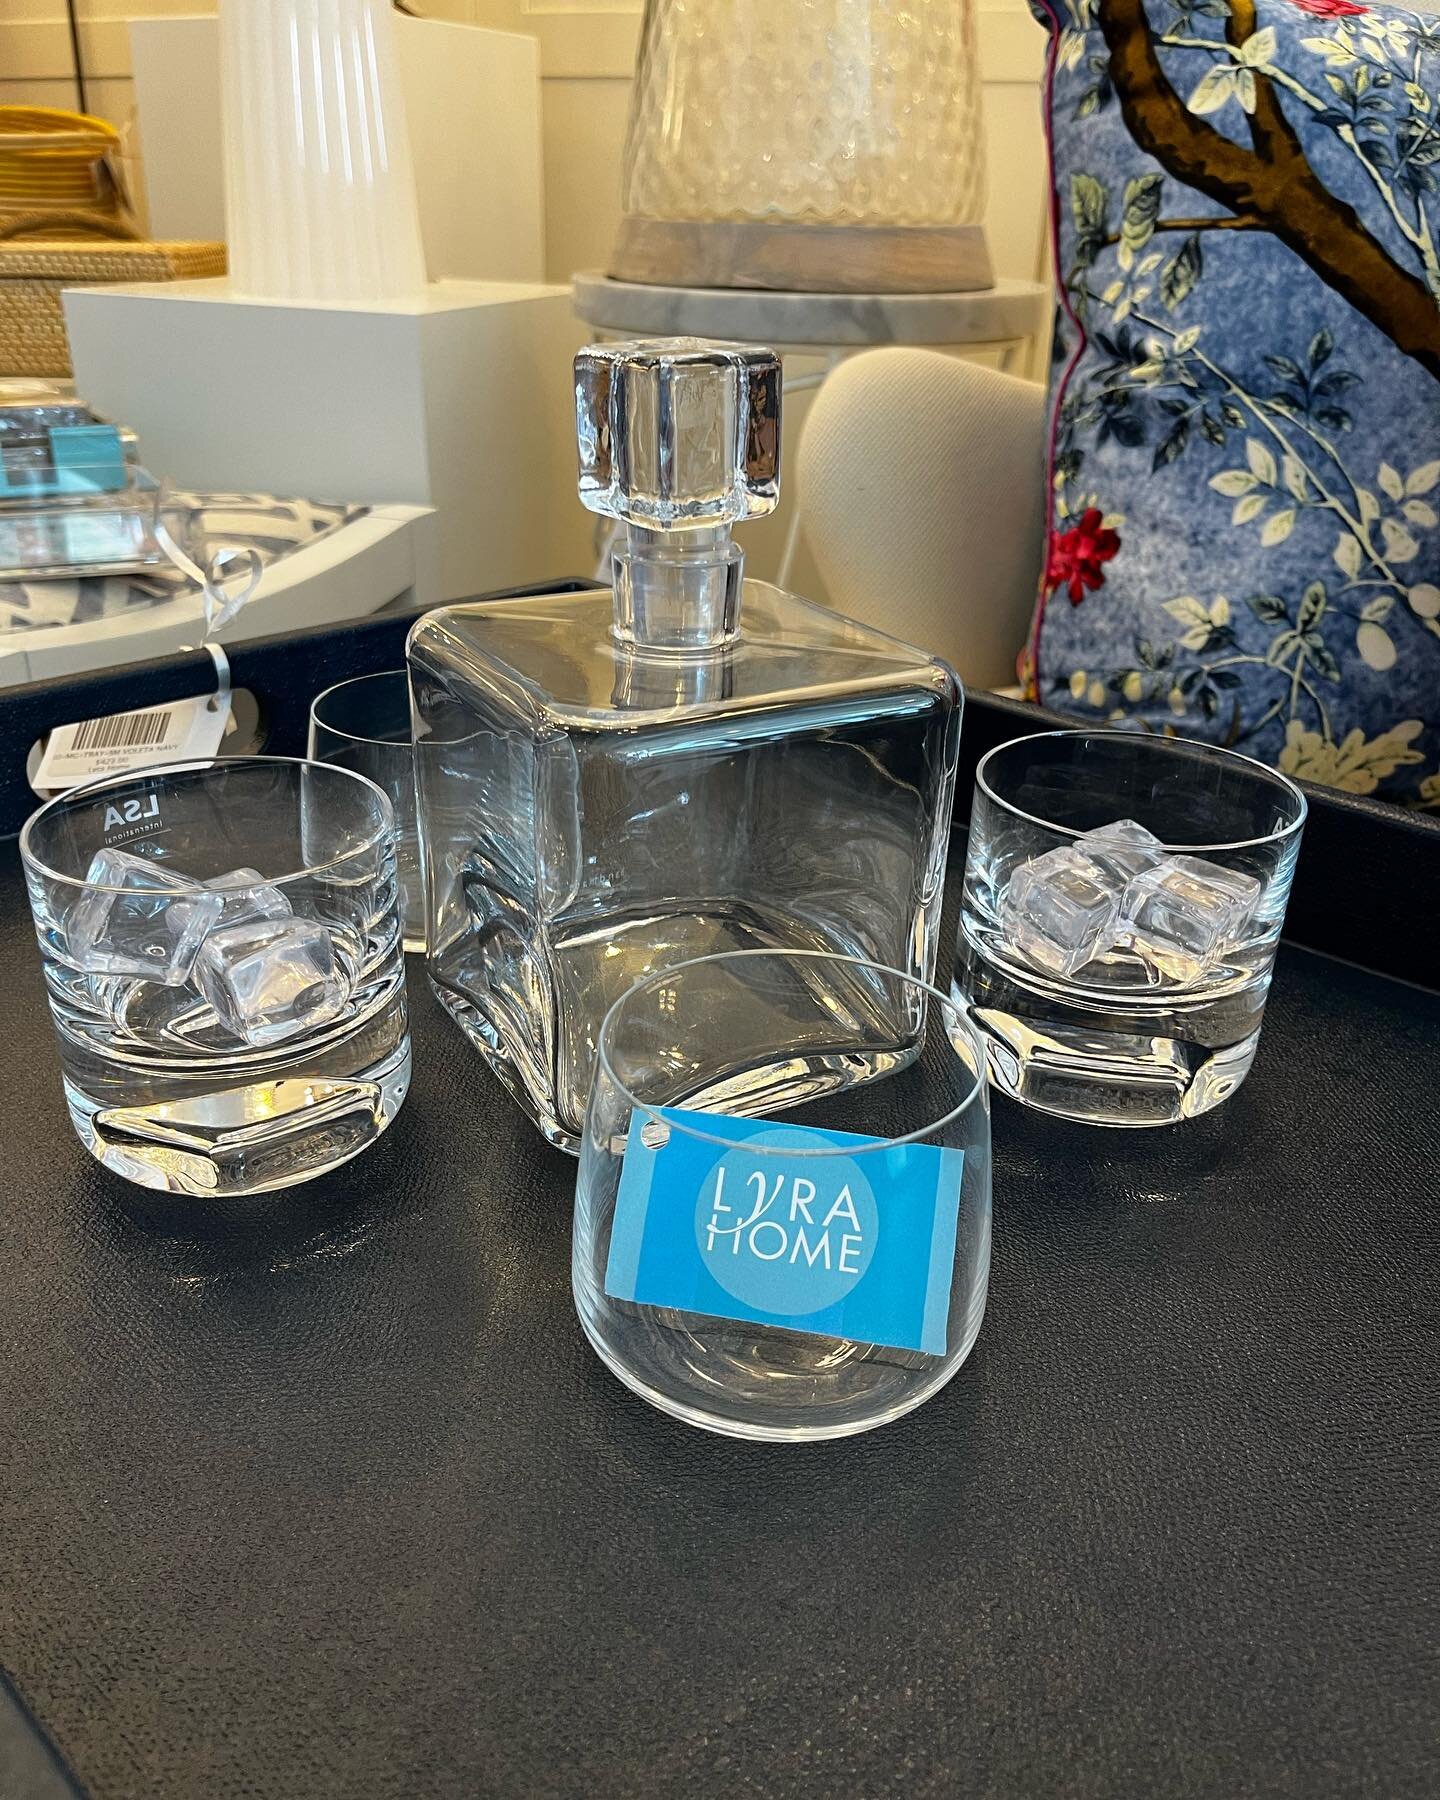 Celebrate Dad this weekend! Lyra Home has something every Dad is sure to love.
.
.
.
.
.
#lyrahome #lyrahomebeachside #lyrahomemainland #lyrahomedecor #lyrahomegifts #fathersday #fathersdaygifts #celebratedad #vero #verobeach #shoplocal #shopsmall #3